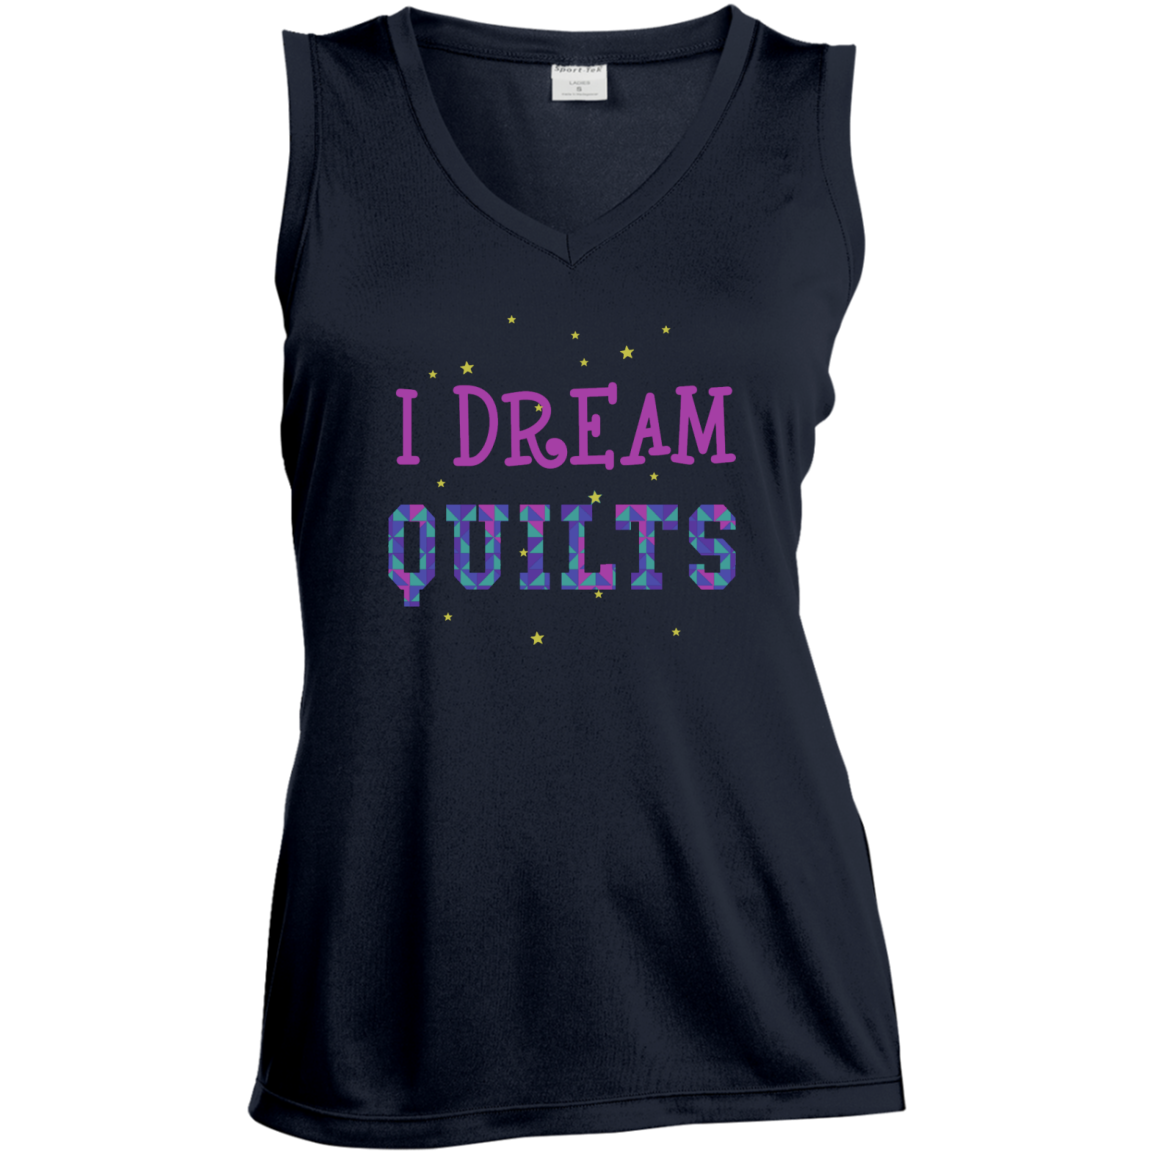 I Dream Quilts Ladies Sleeveless V-neck - Crafter4Life - 4